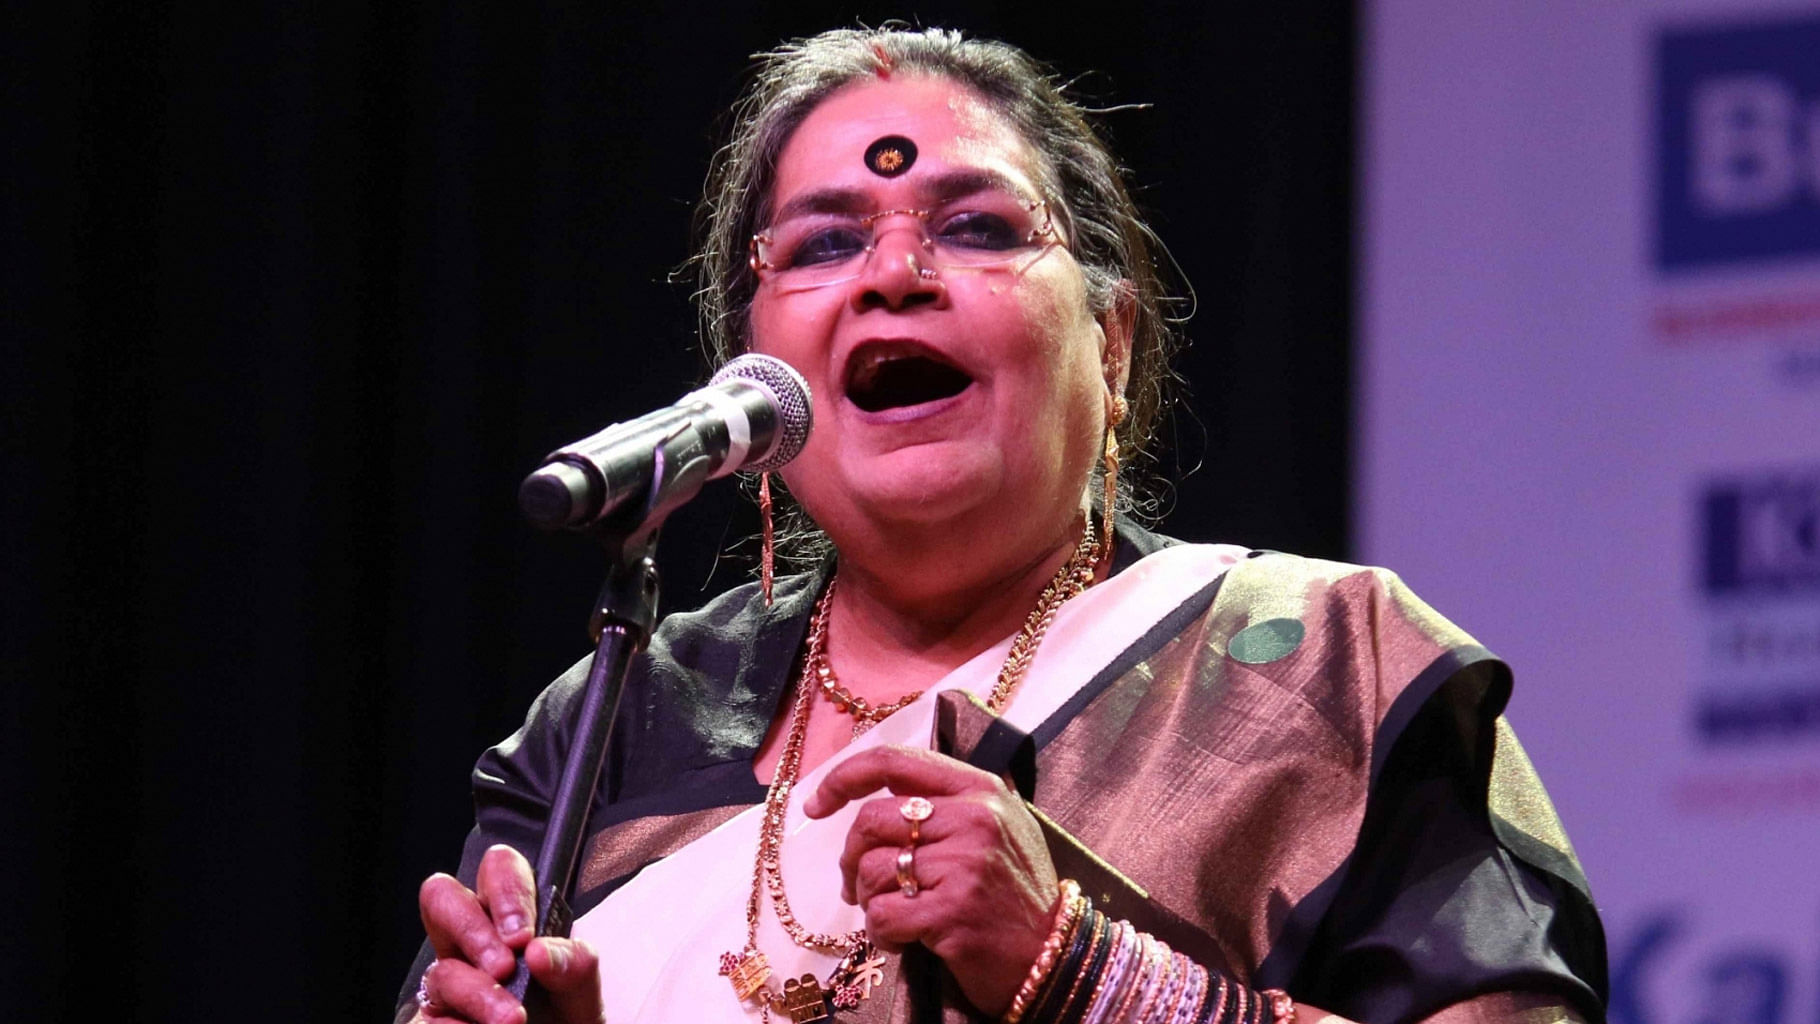 Singer Usha Uthup performs during a programme organised by PHD Chamber at Siri Fort Auditorium in New Delhi (Photo: IANS)